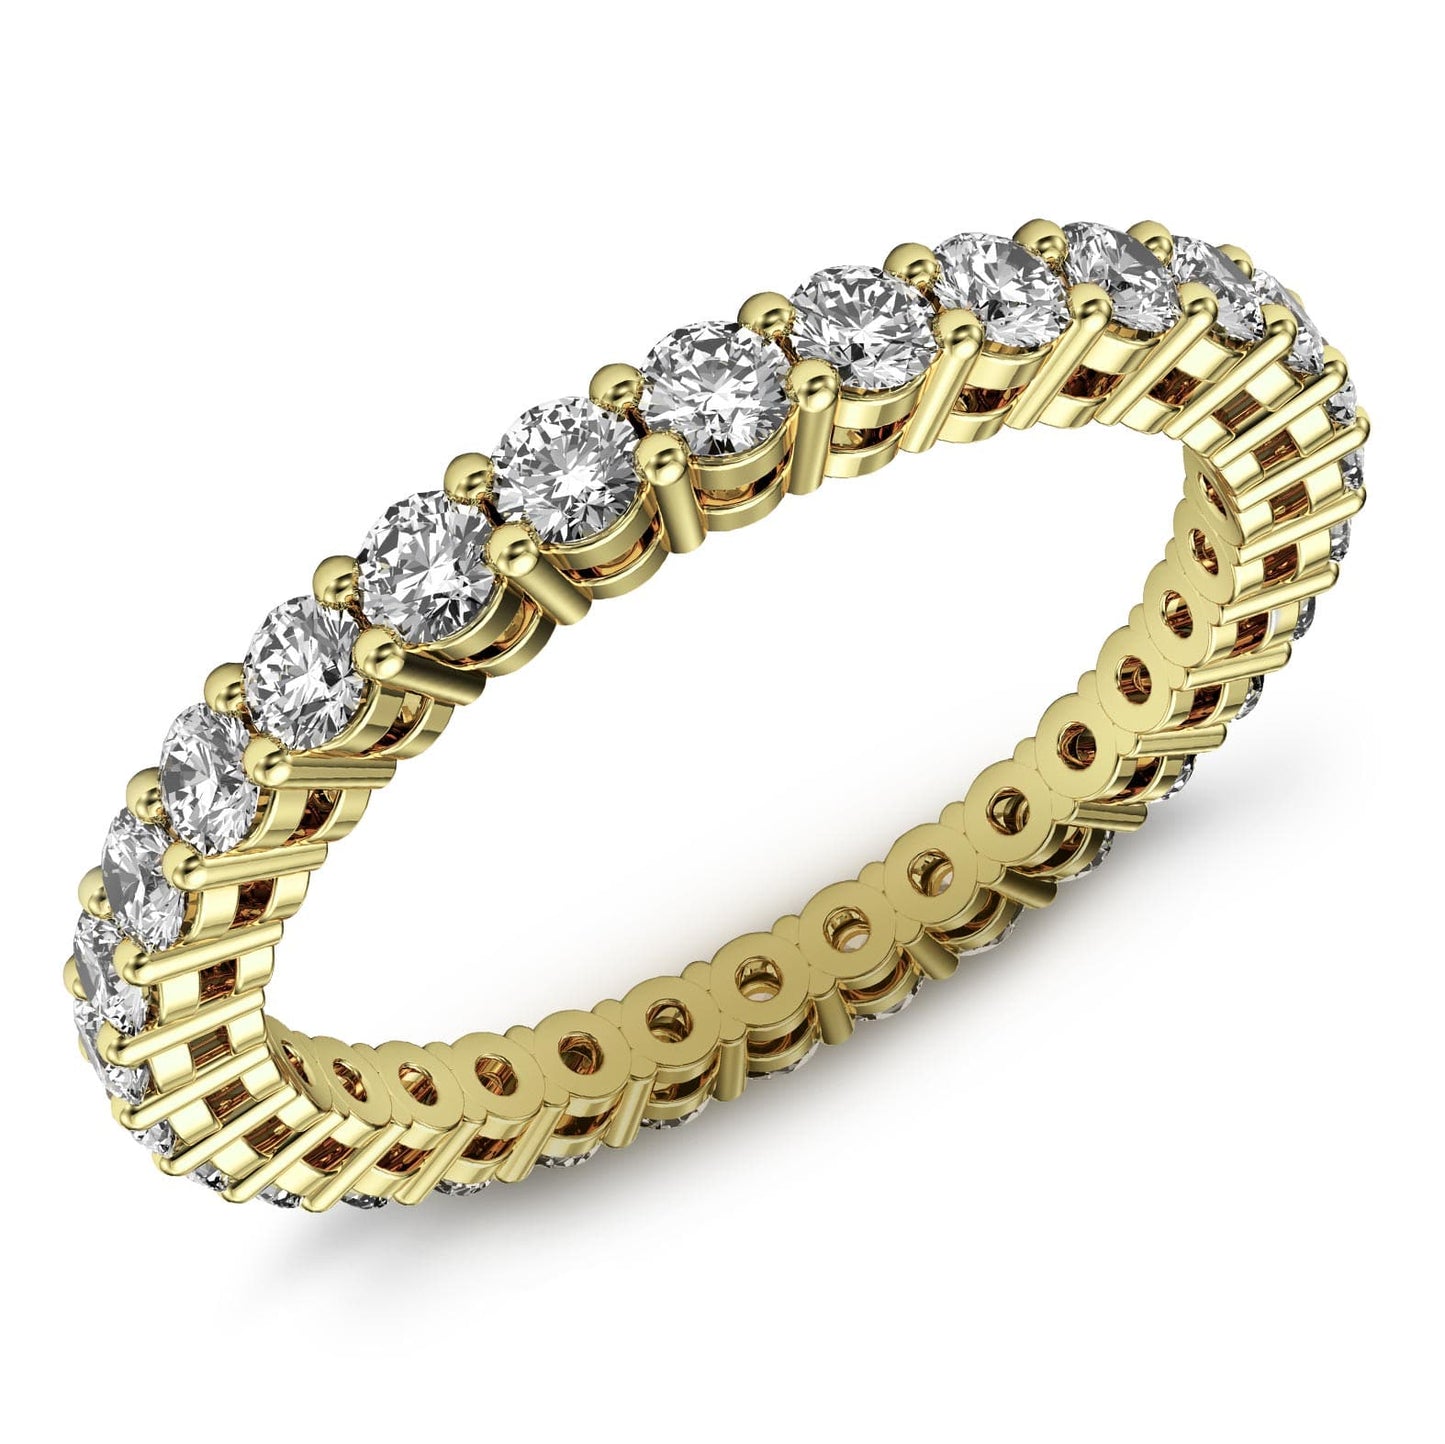 1.5ct Classic Prong Diamond Eternity Ring in 14k Gold